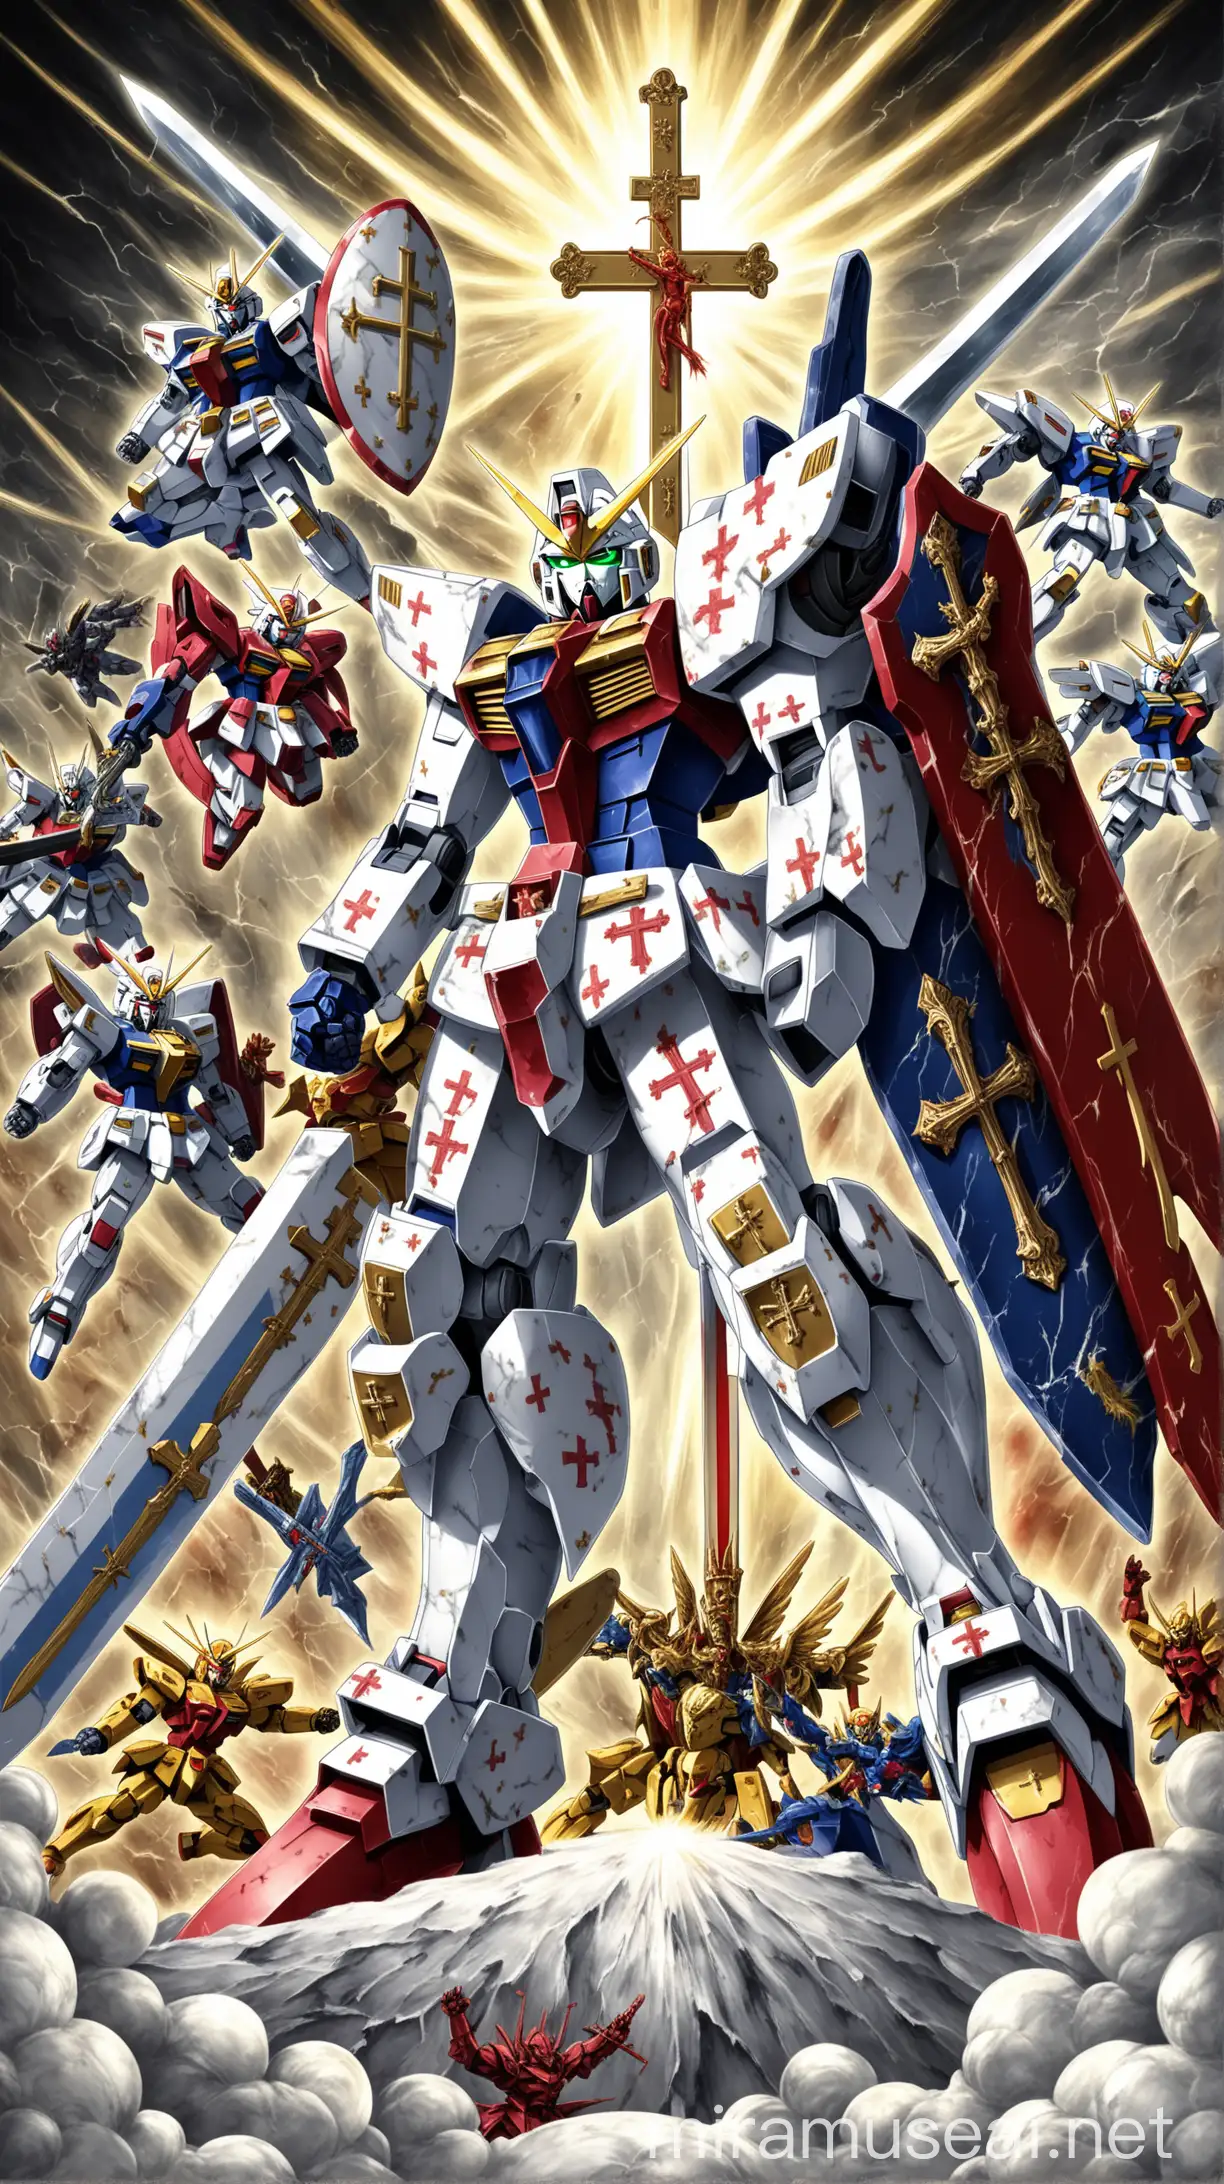 Catholic Marble Suit Gundam Adorn with crosses and Mighty sword and shield Fighting off demons 